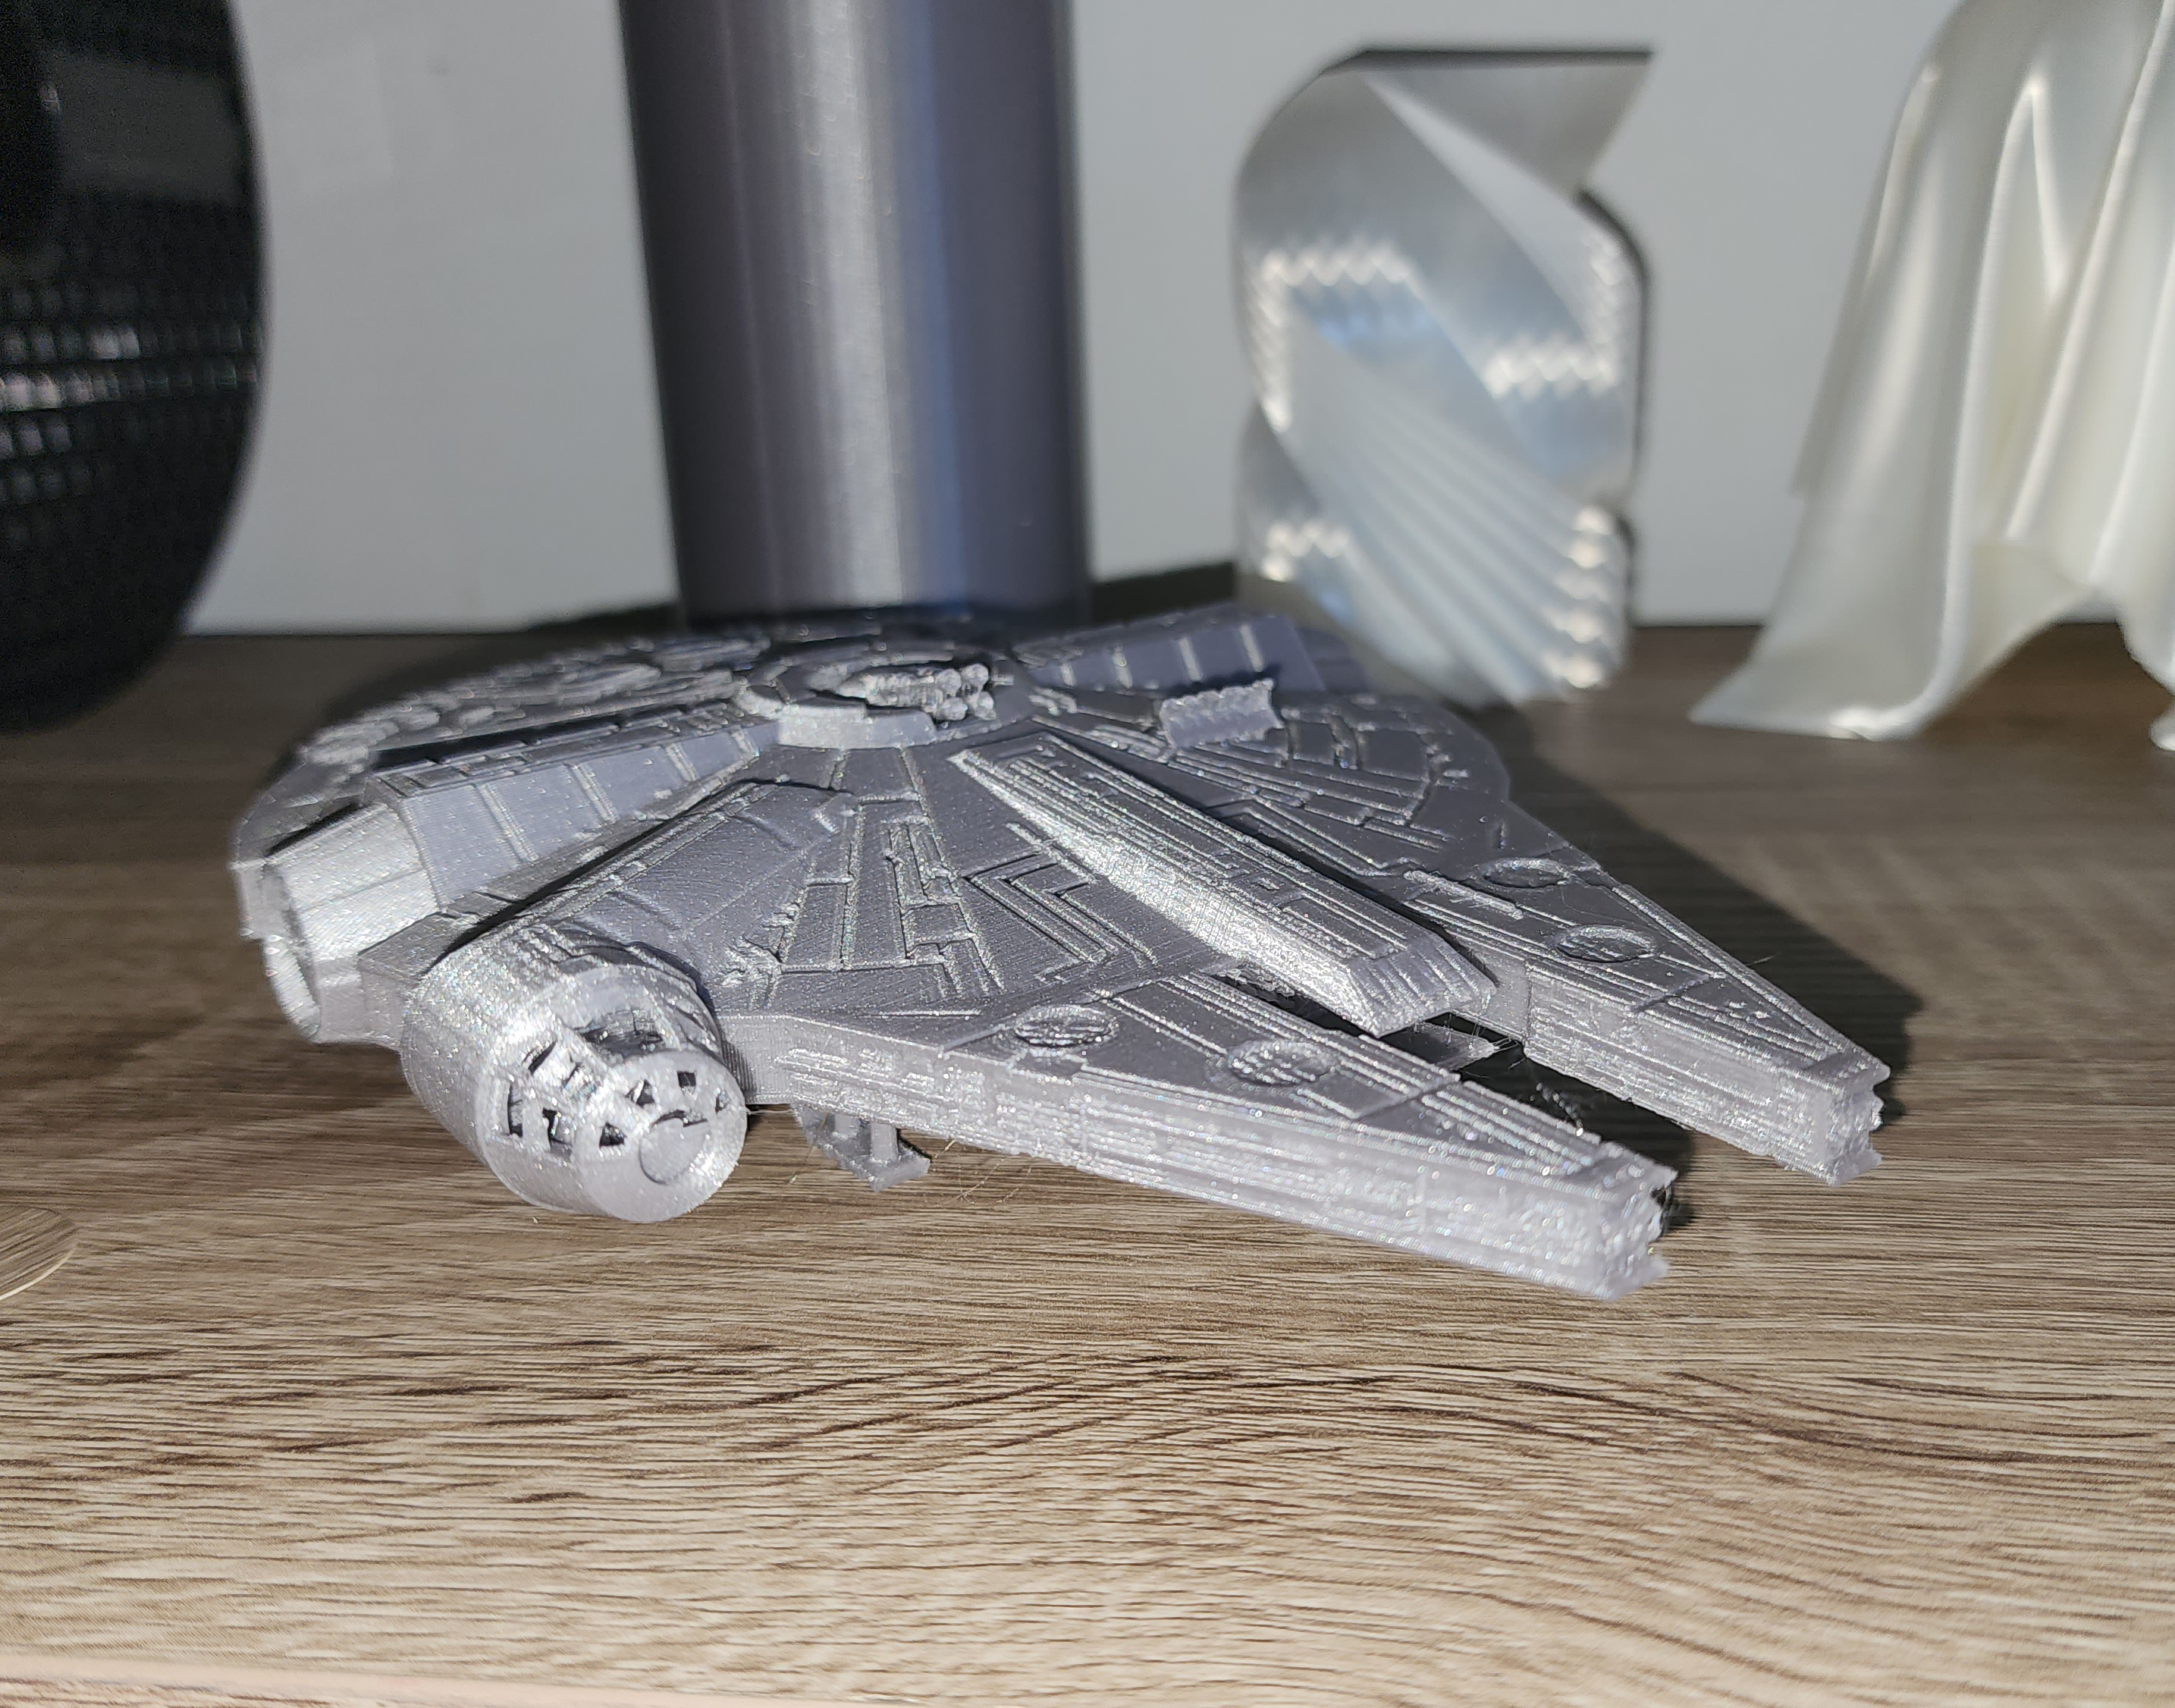 Millennium Falcon with landing gear deployed - standing print